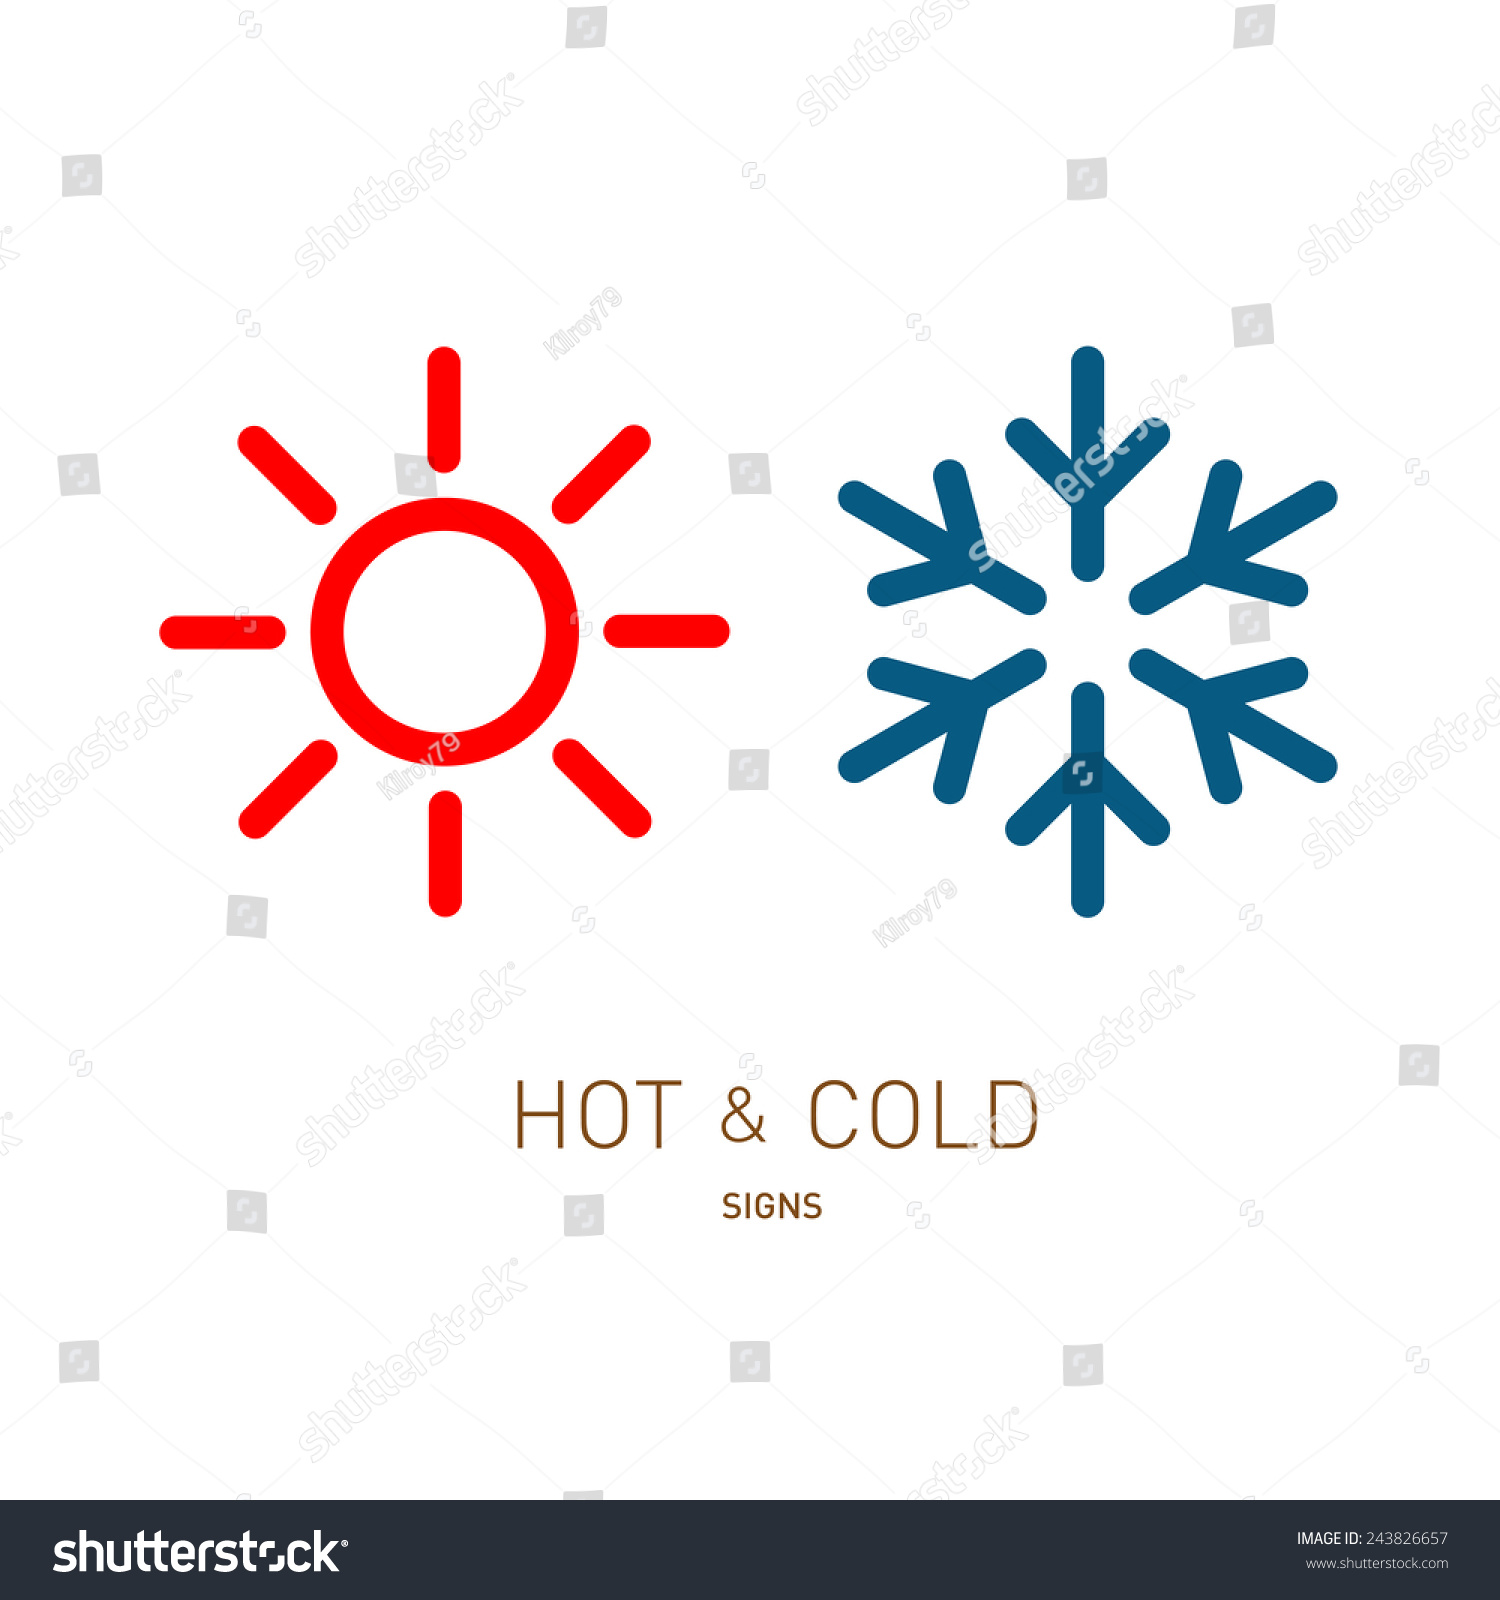 Hot and cold sun and snowflake icons #243826657